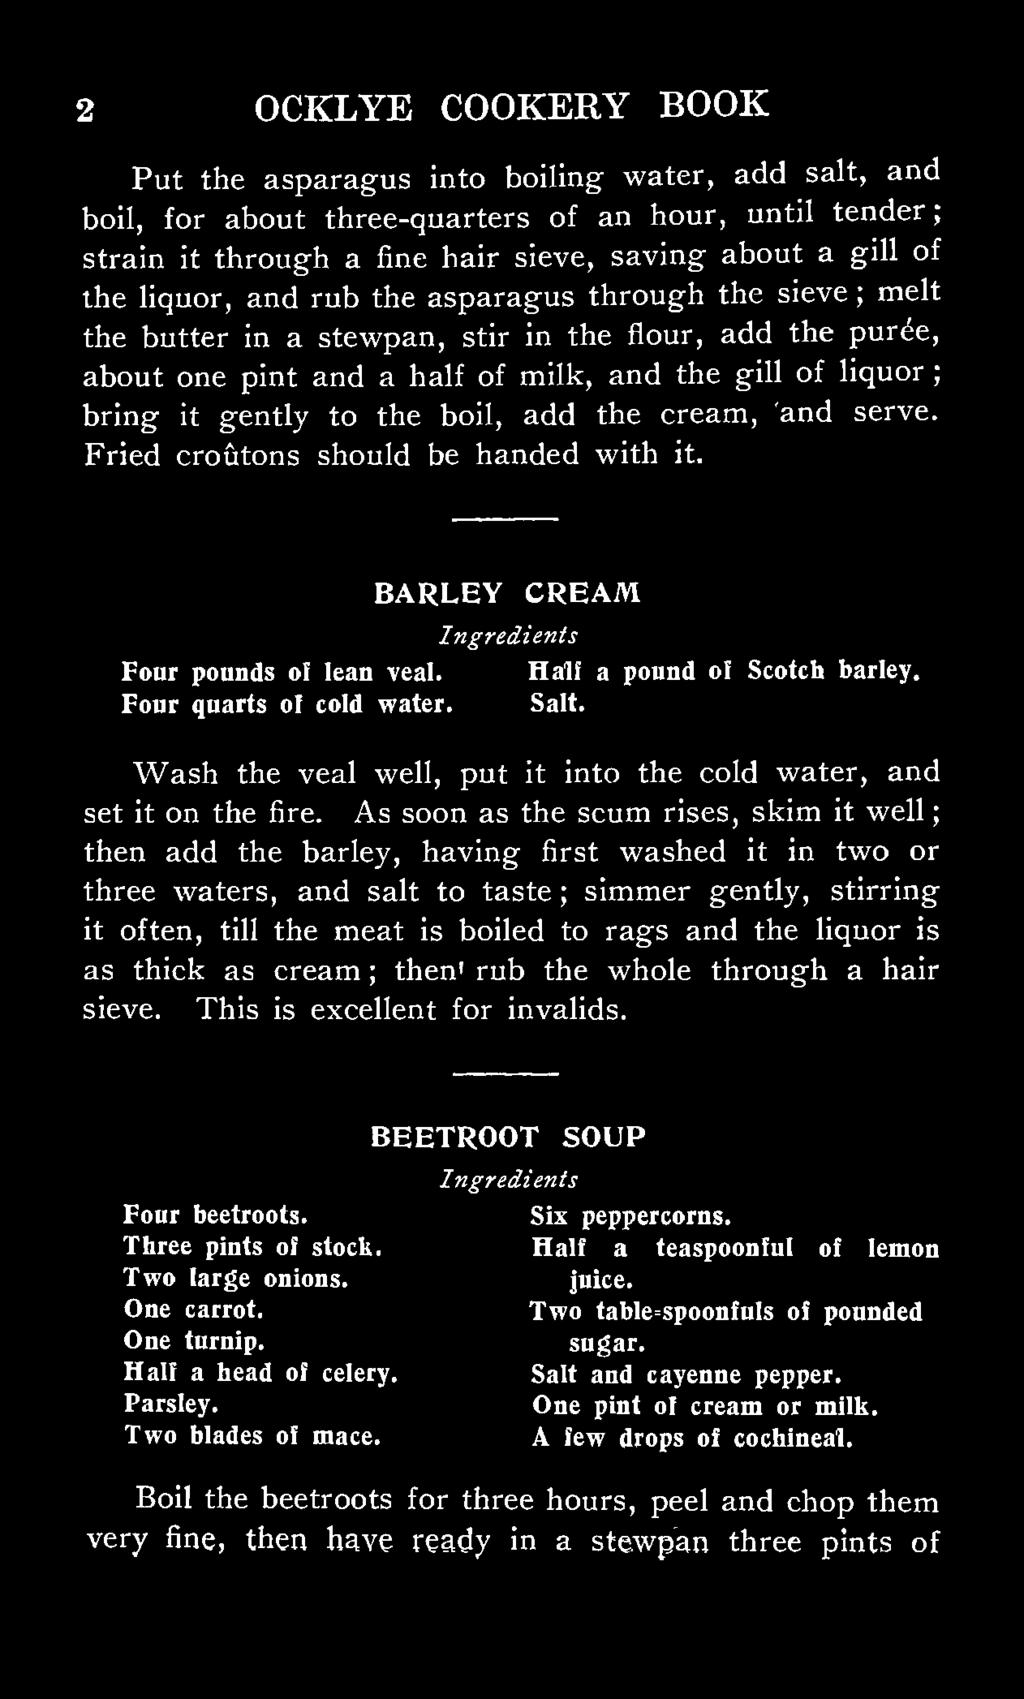 boil, add the cream, and serve. Fried croutons should be handed with it. BARLEY CREAM Four pounds of lean veal. Half a pound of Scotch bailey. Four quarts of cold water. Salt.